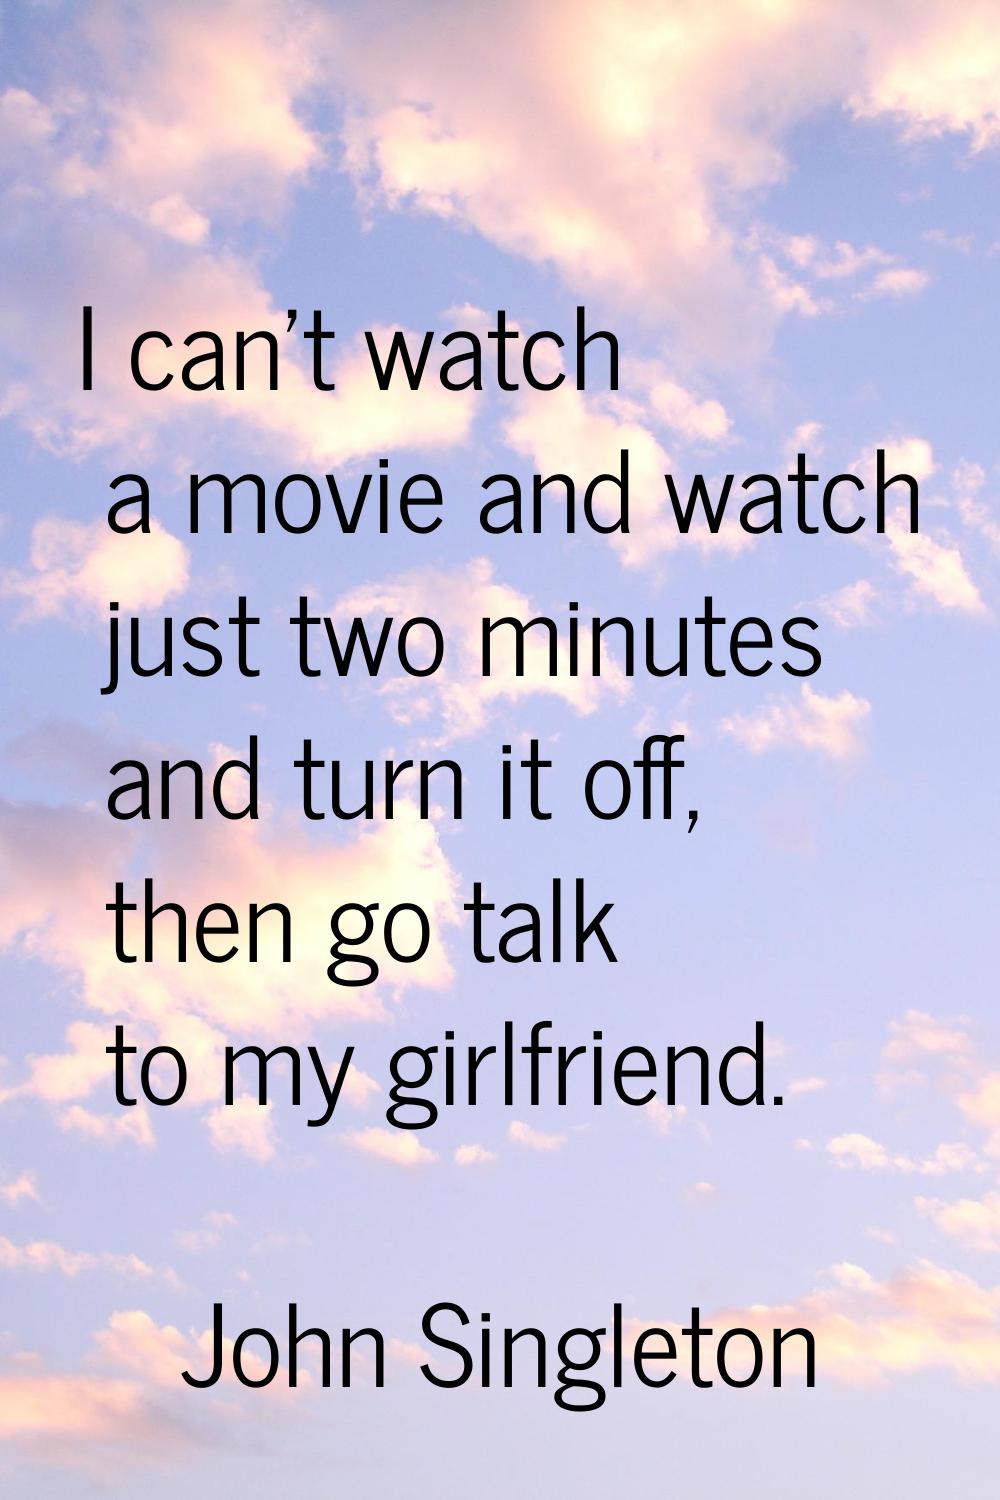 I can't watch a movie and watch just two minutes and turn it off, then go talk to my girlfriend.